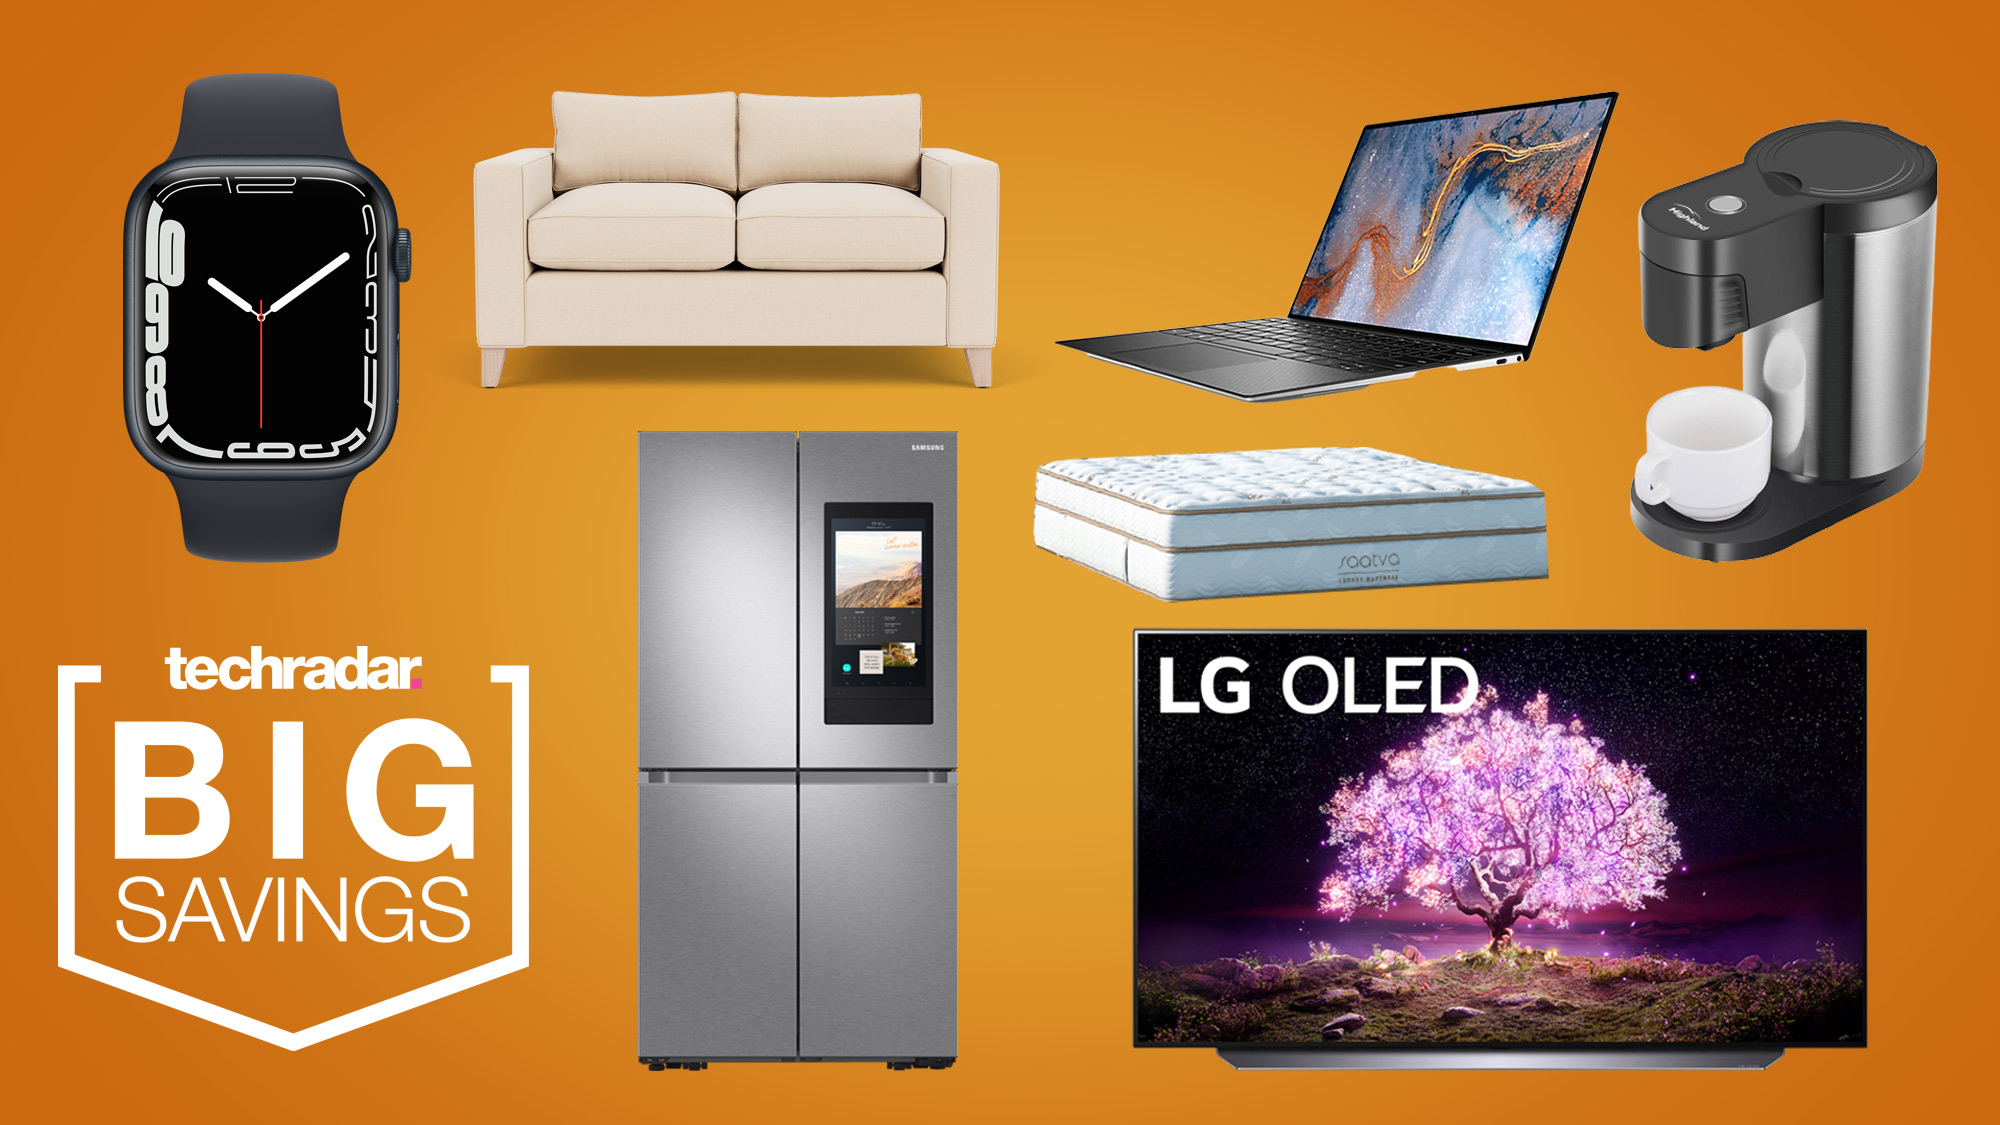 Presidents Day sales header with various tech products on an orange background